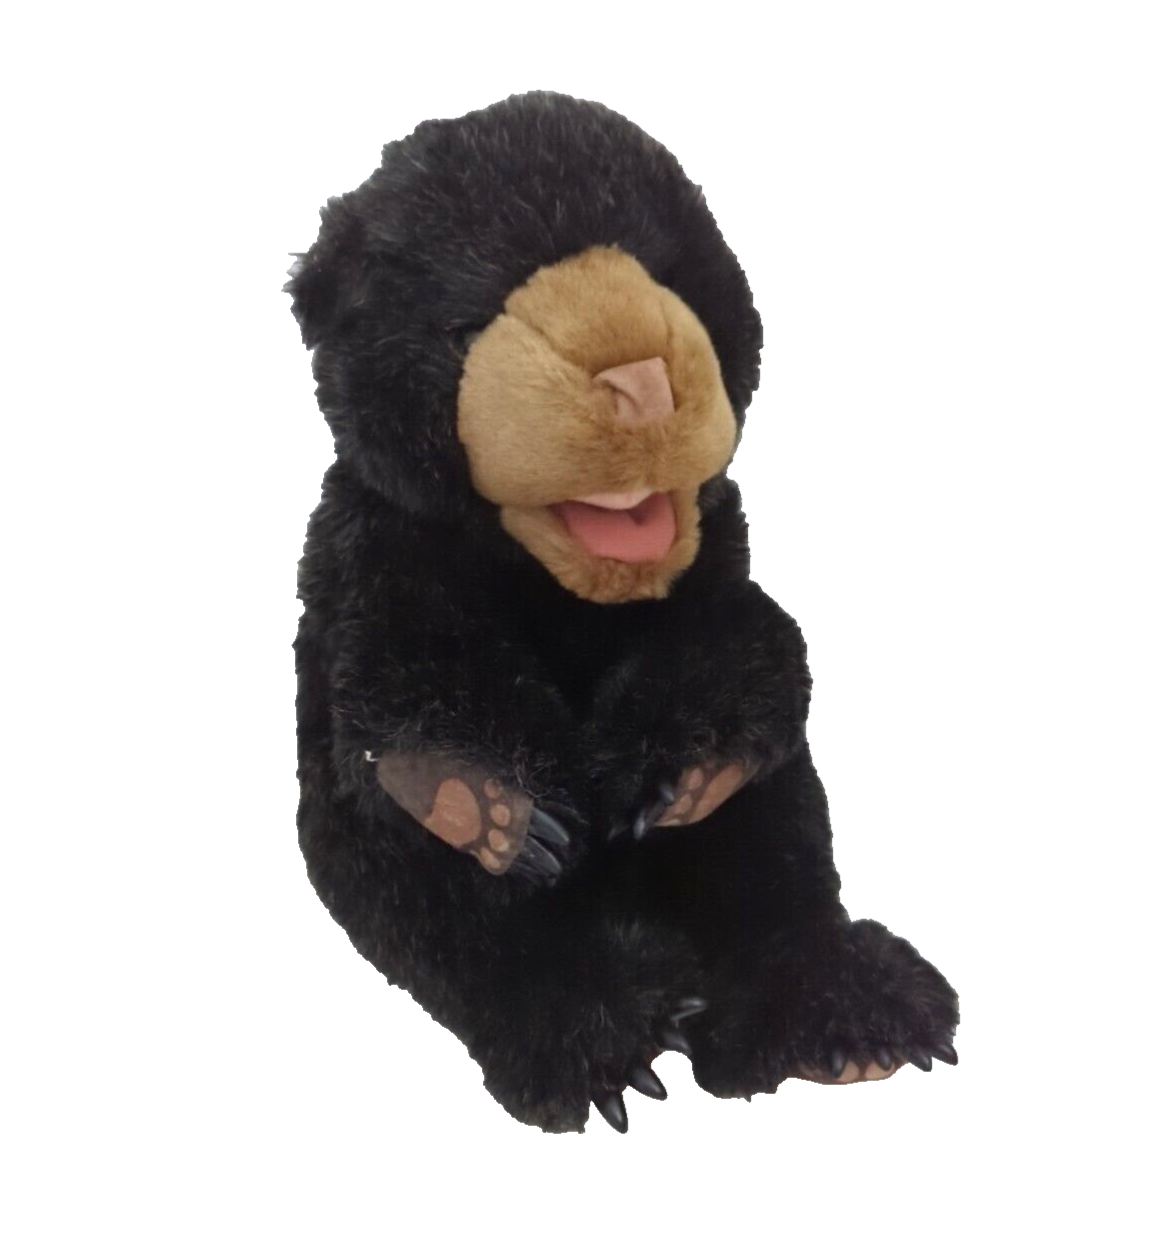 Primary image for Folkmanis Black Bear Cub Puppet 12"